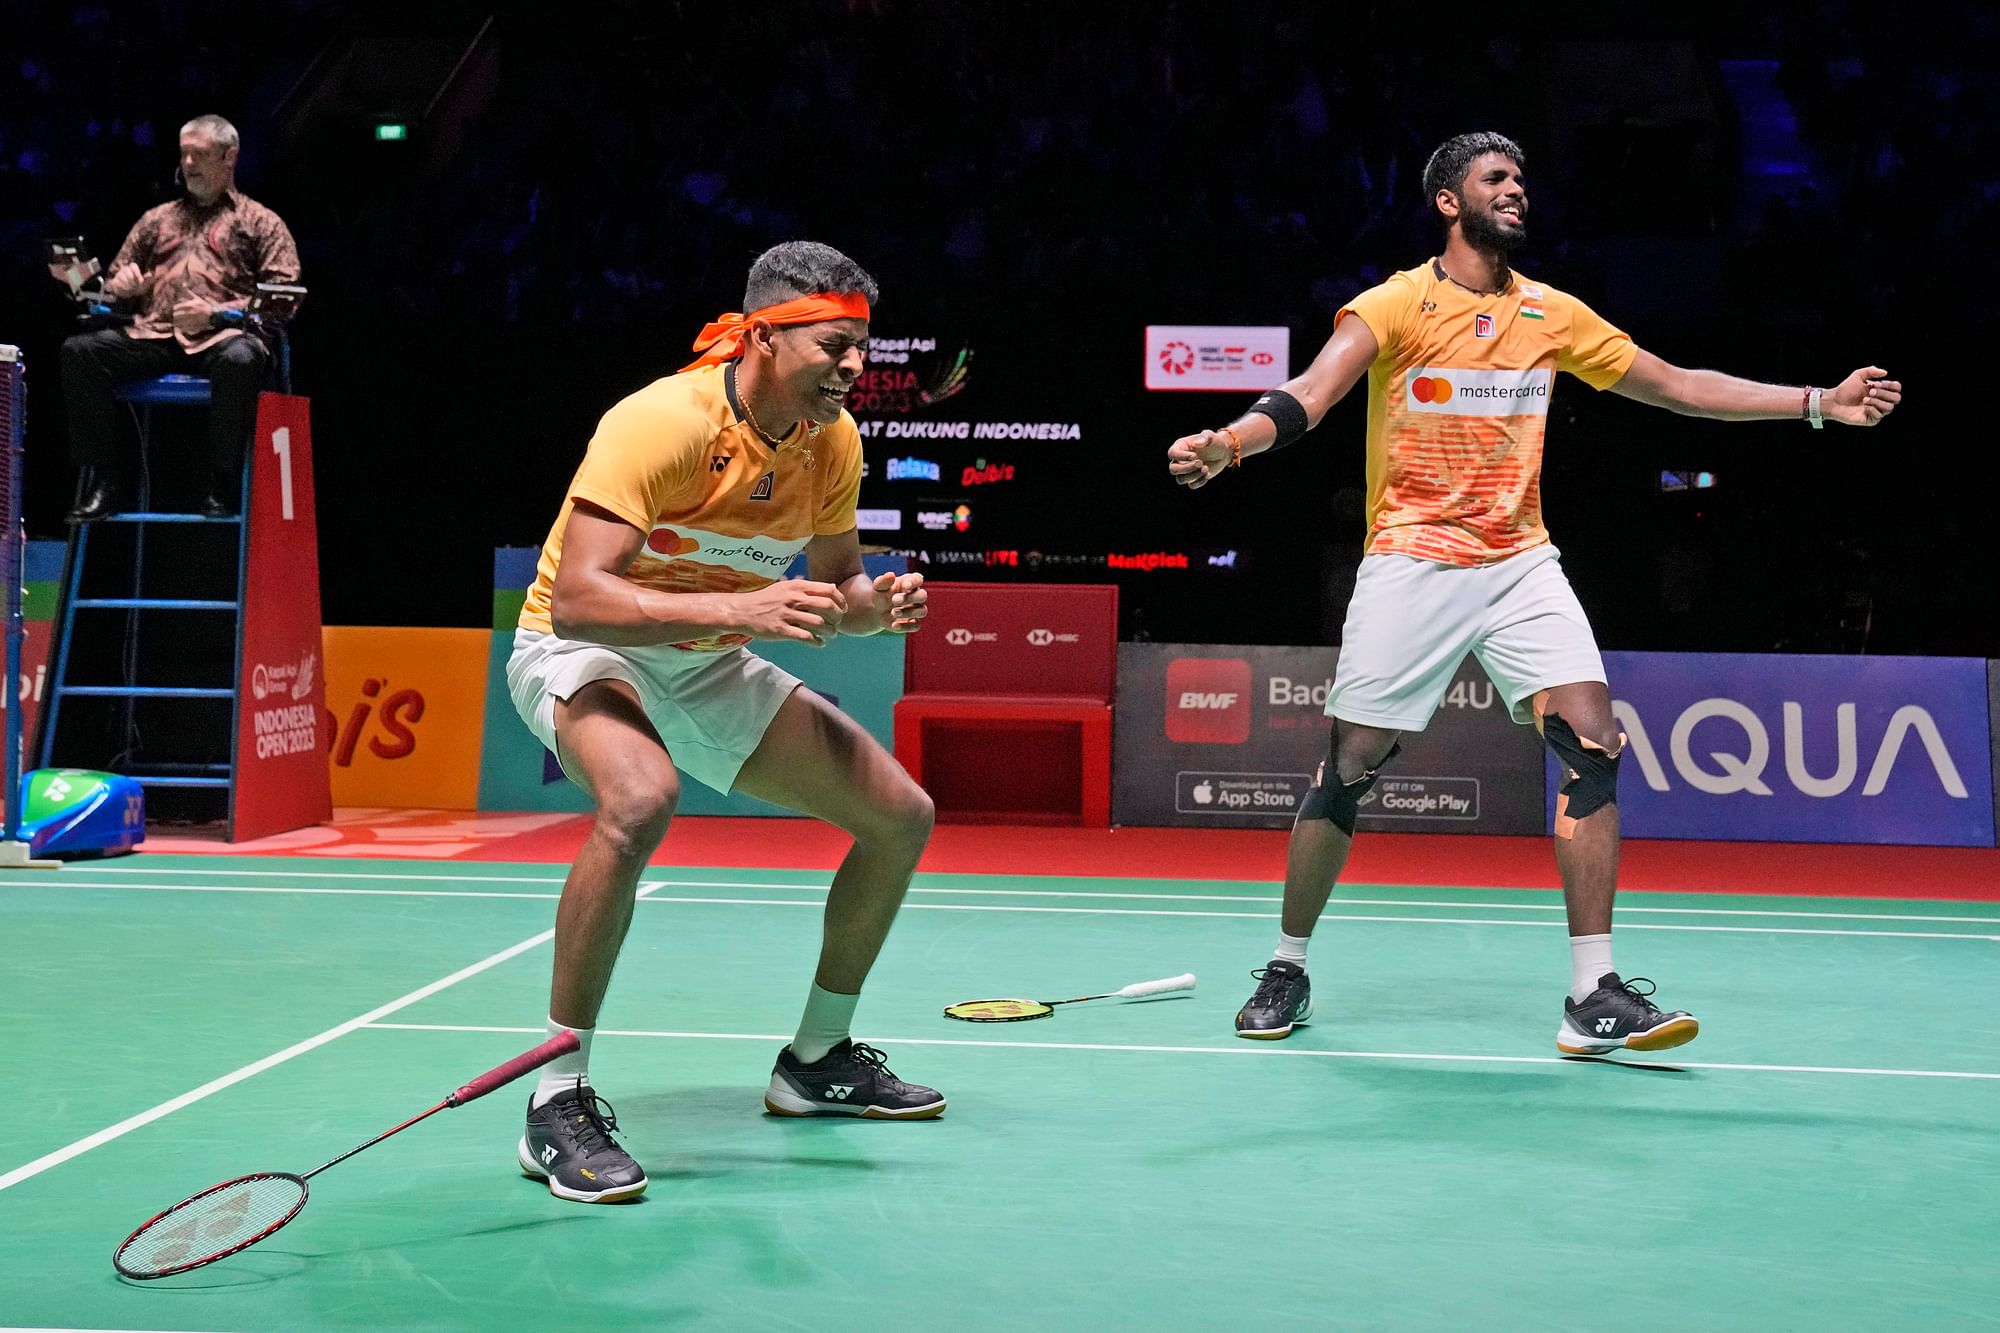 Satwik-Chirag Continue Their Impressive Ascent to The Summit of Badminton